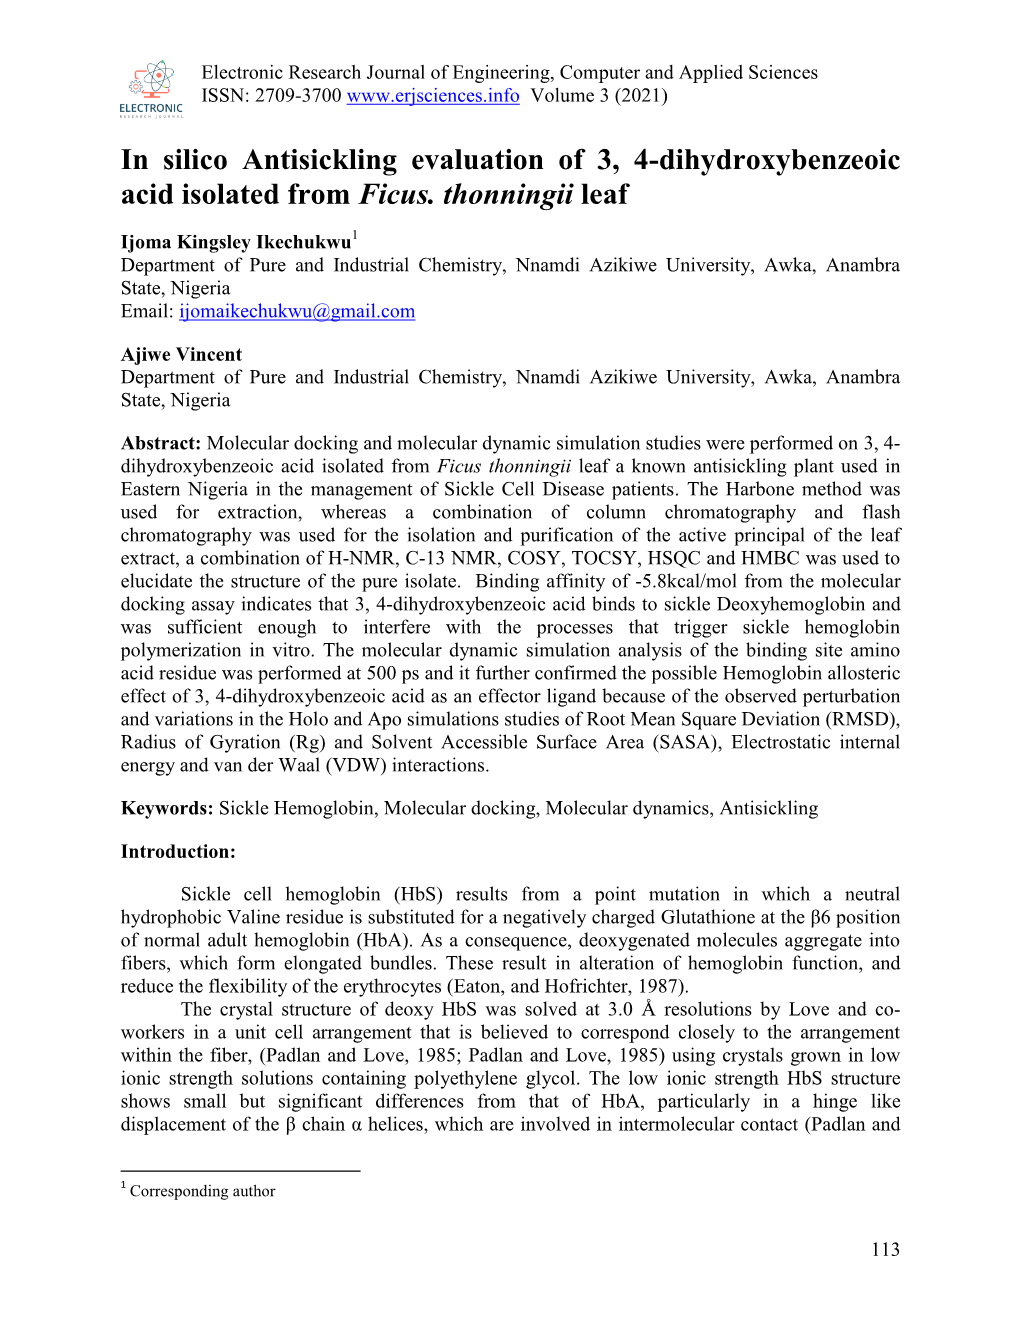 In Silico Antisickling Evaluation of 3, 4-Dihydroxybenzeoic Acid Isolated from Ficus